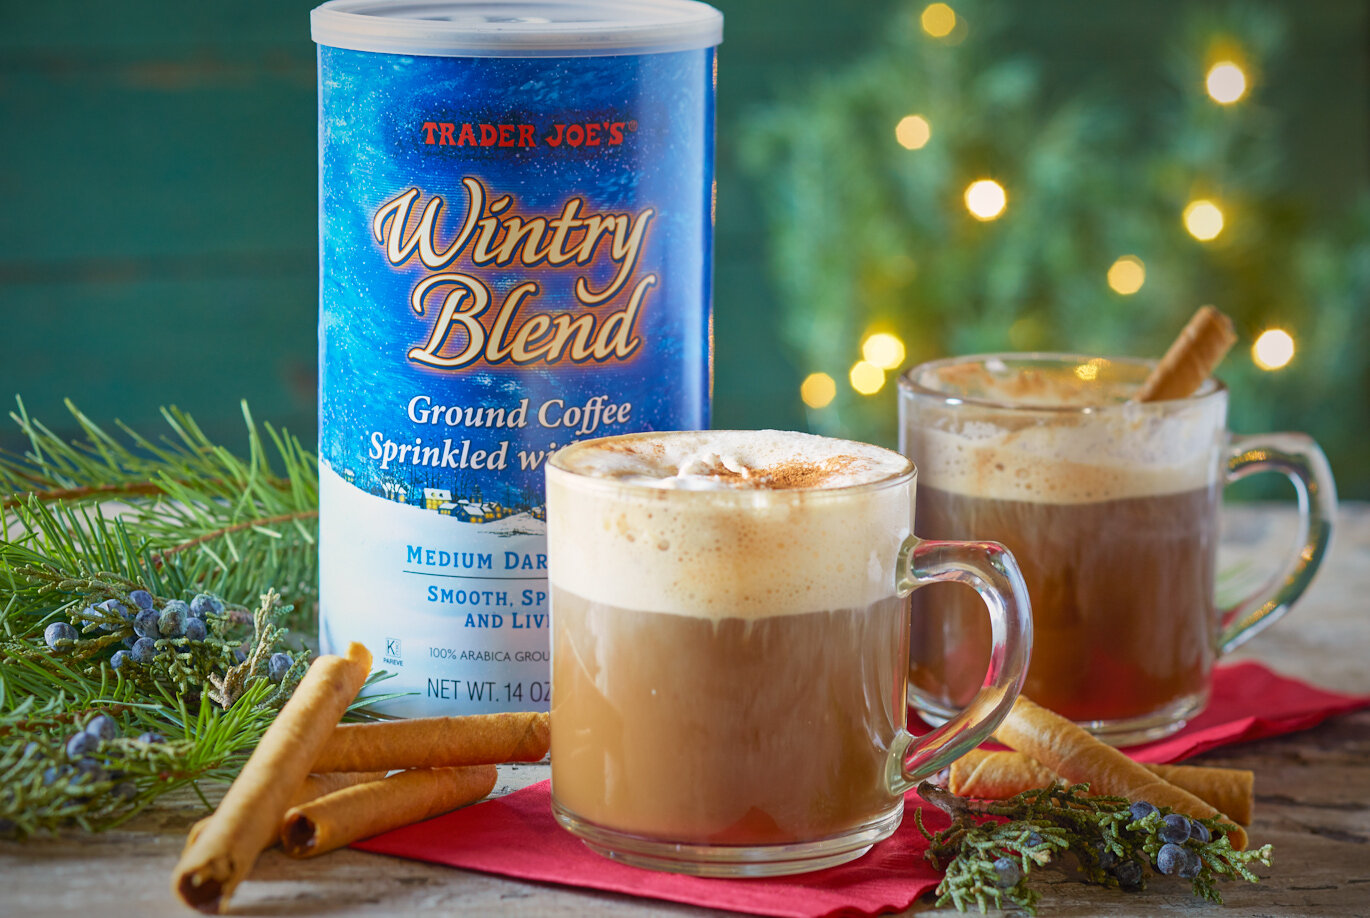 Trader Joe's Wintry Blend Ground Coffee prepared in two glass mugs, topped with frothy cream and cinnamon; a festive background with pine branches and lights